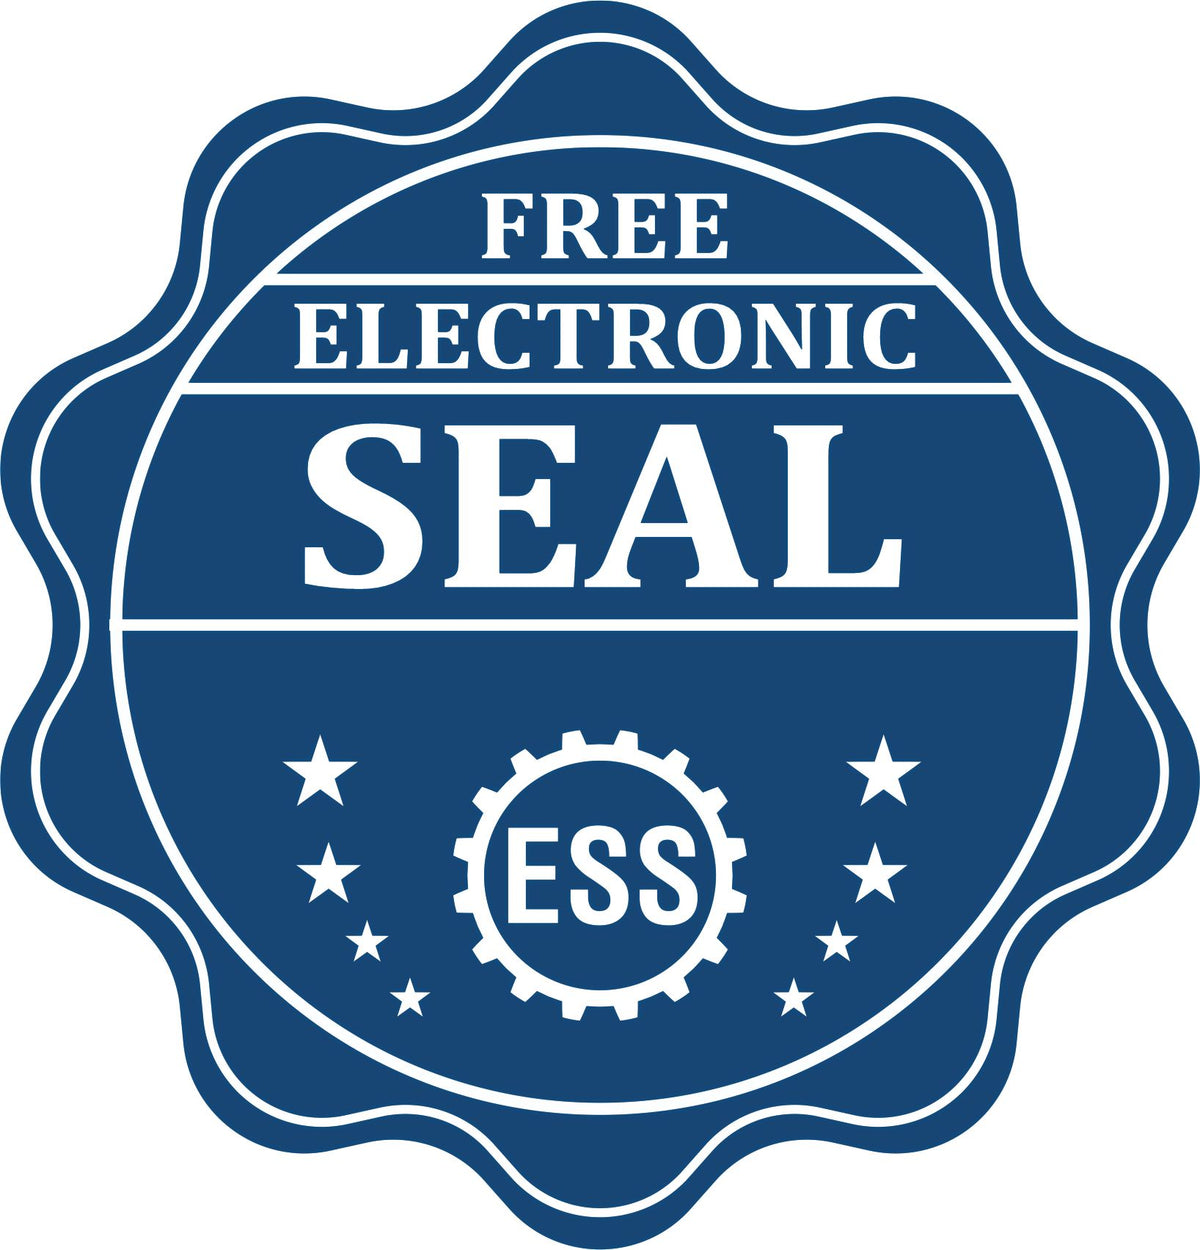 A badge showing a free electronic seal for the Soft Pocket Oklahoma Landscape Architect Embosser with stars and the ESS gear on the emblem.